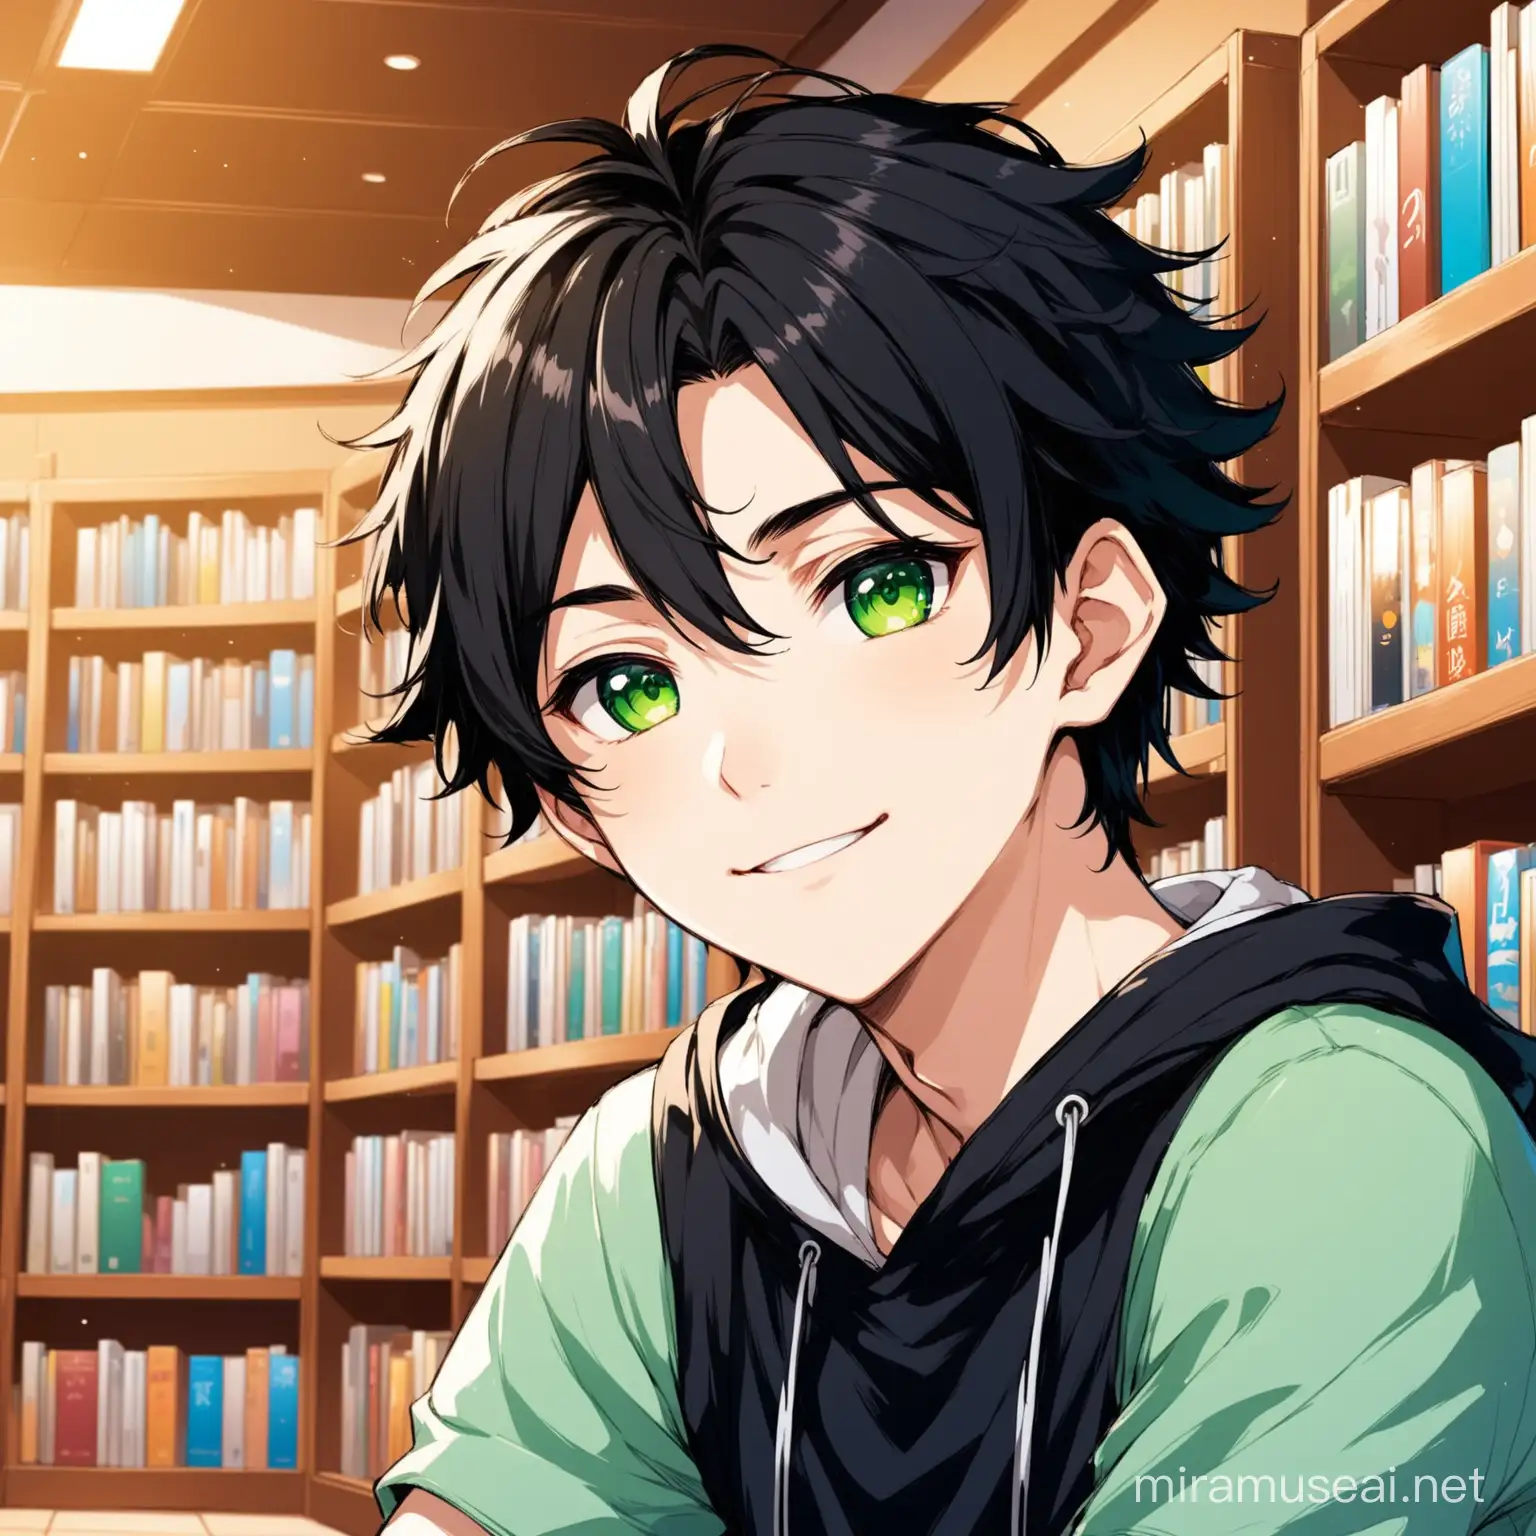 AnimeStyle Portrait of a Young Boy with Green Eyes and Bookshelves Background